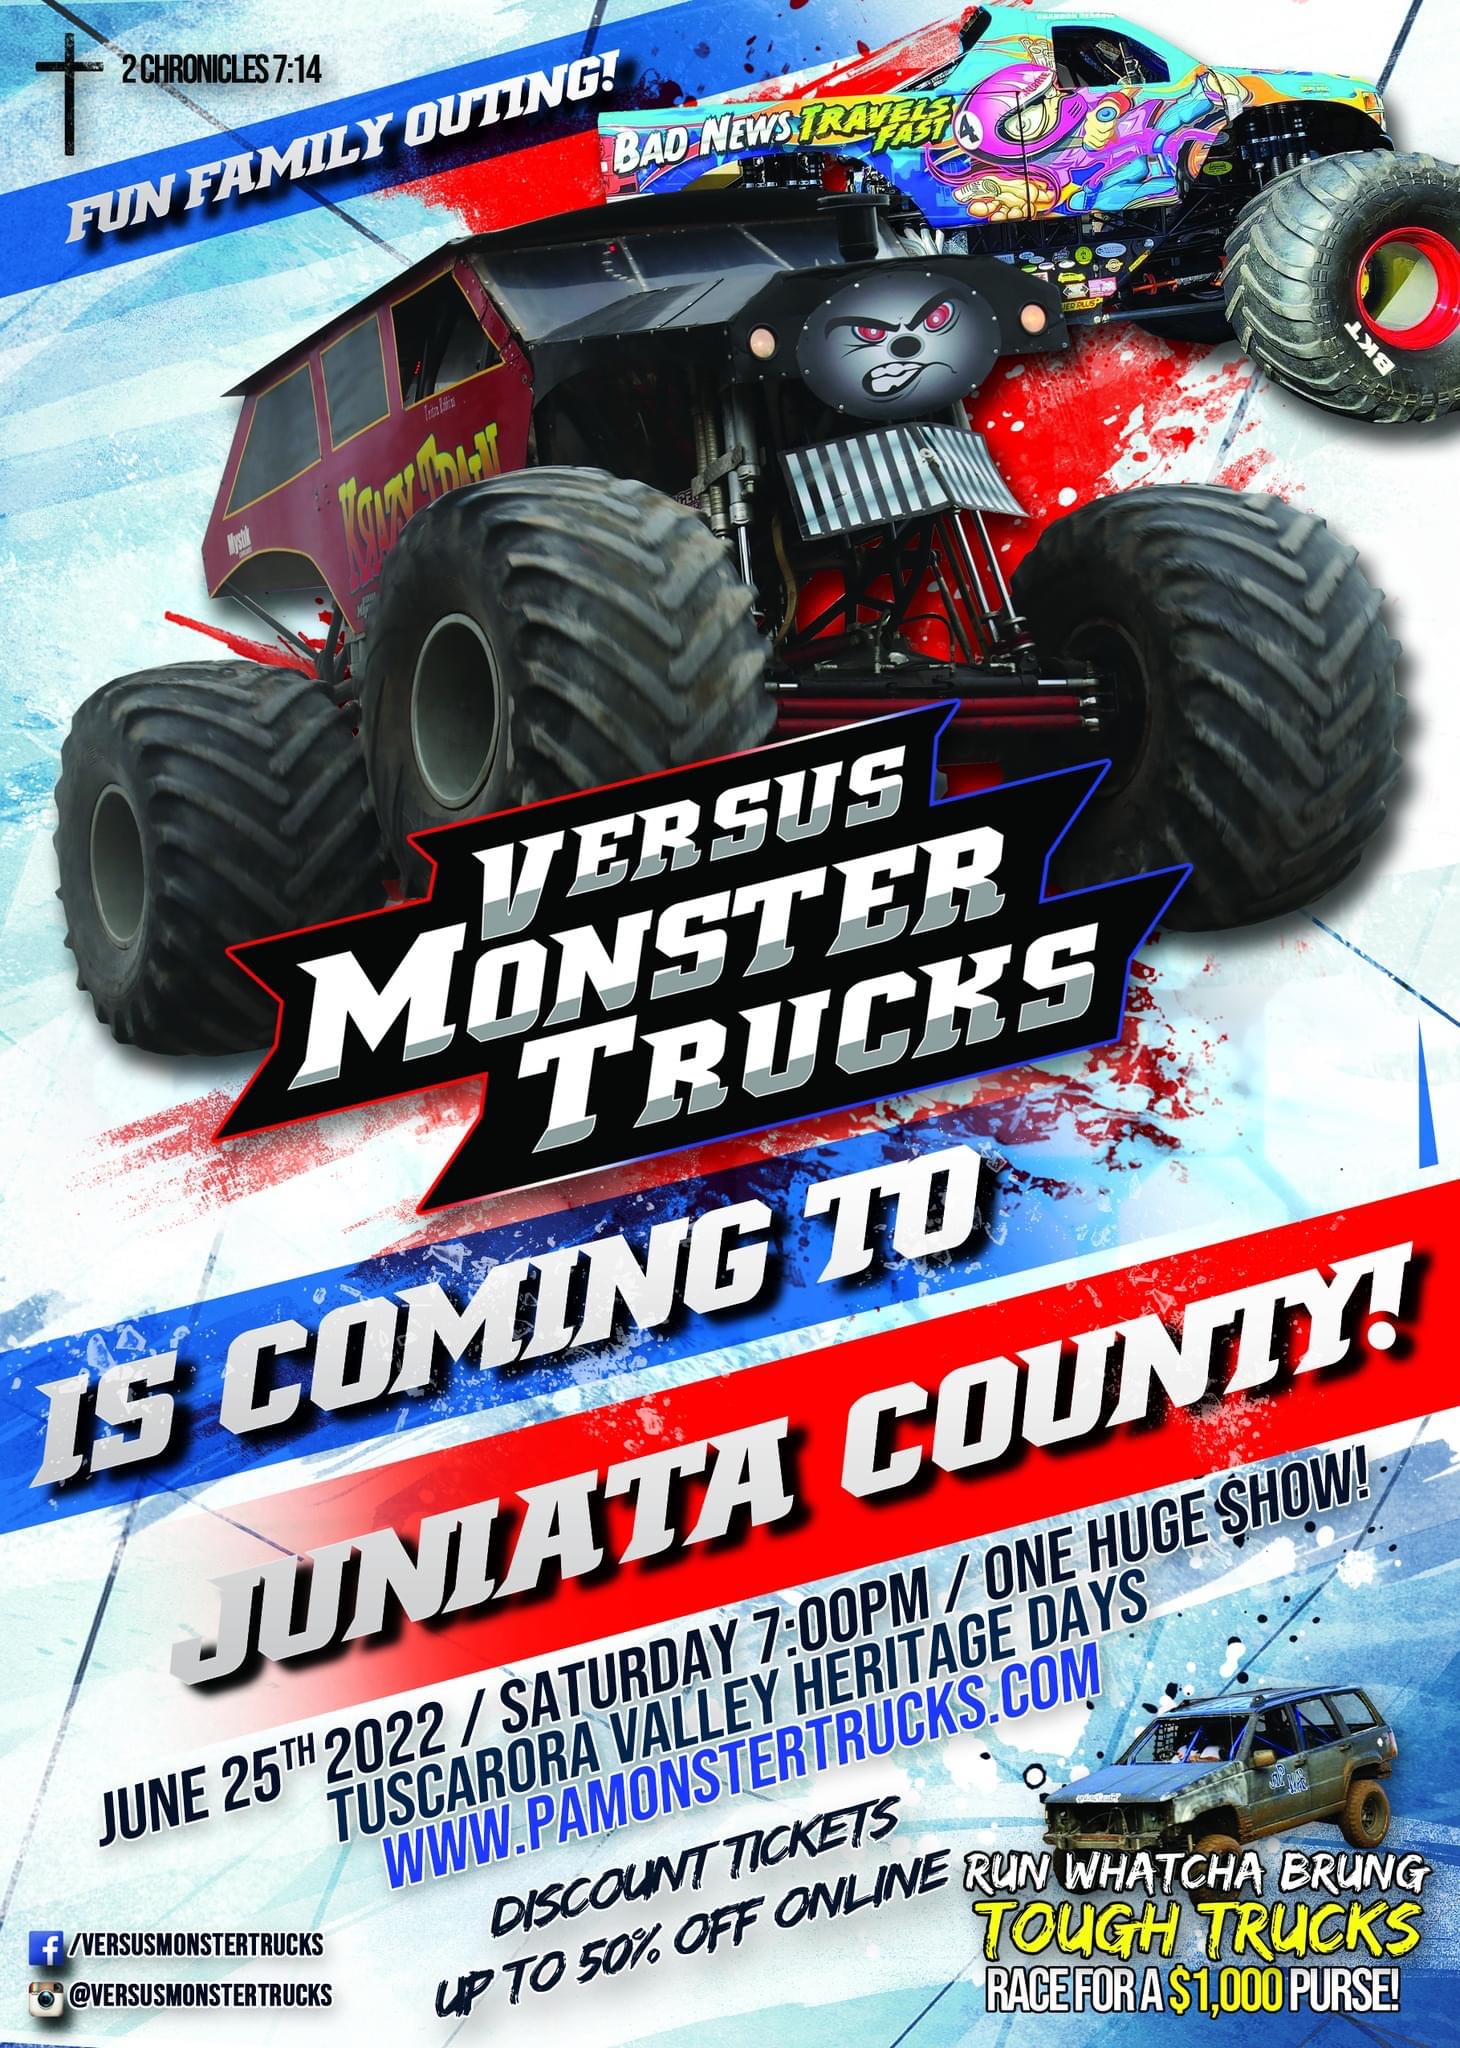 Friday! Friday! Friday! Monster truck tour comes to Rochester in November -  Post Bulletin